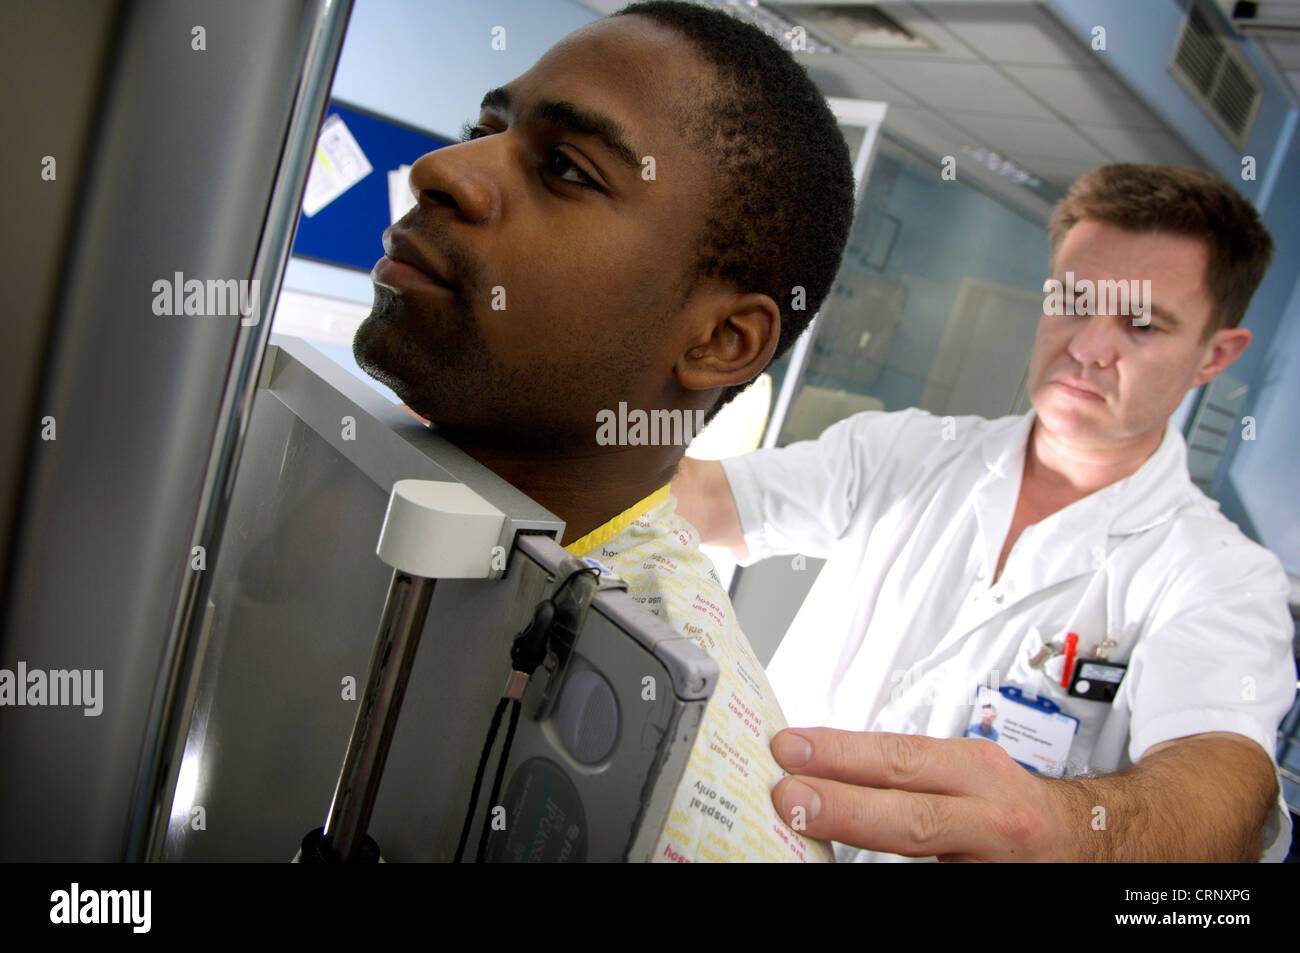 A radiologist x-rays a male patient who is standing in front of the x-ray machine. Stock Photo